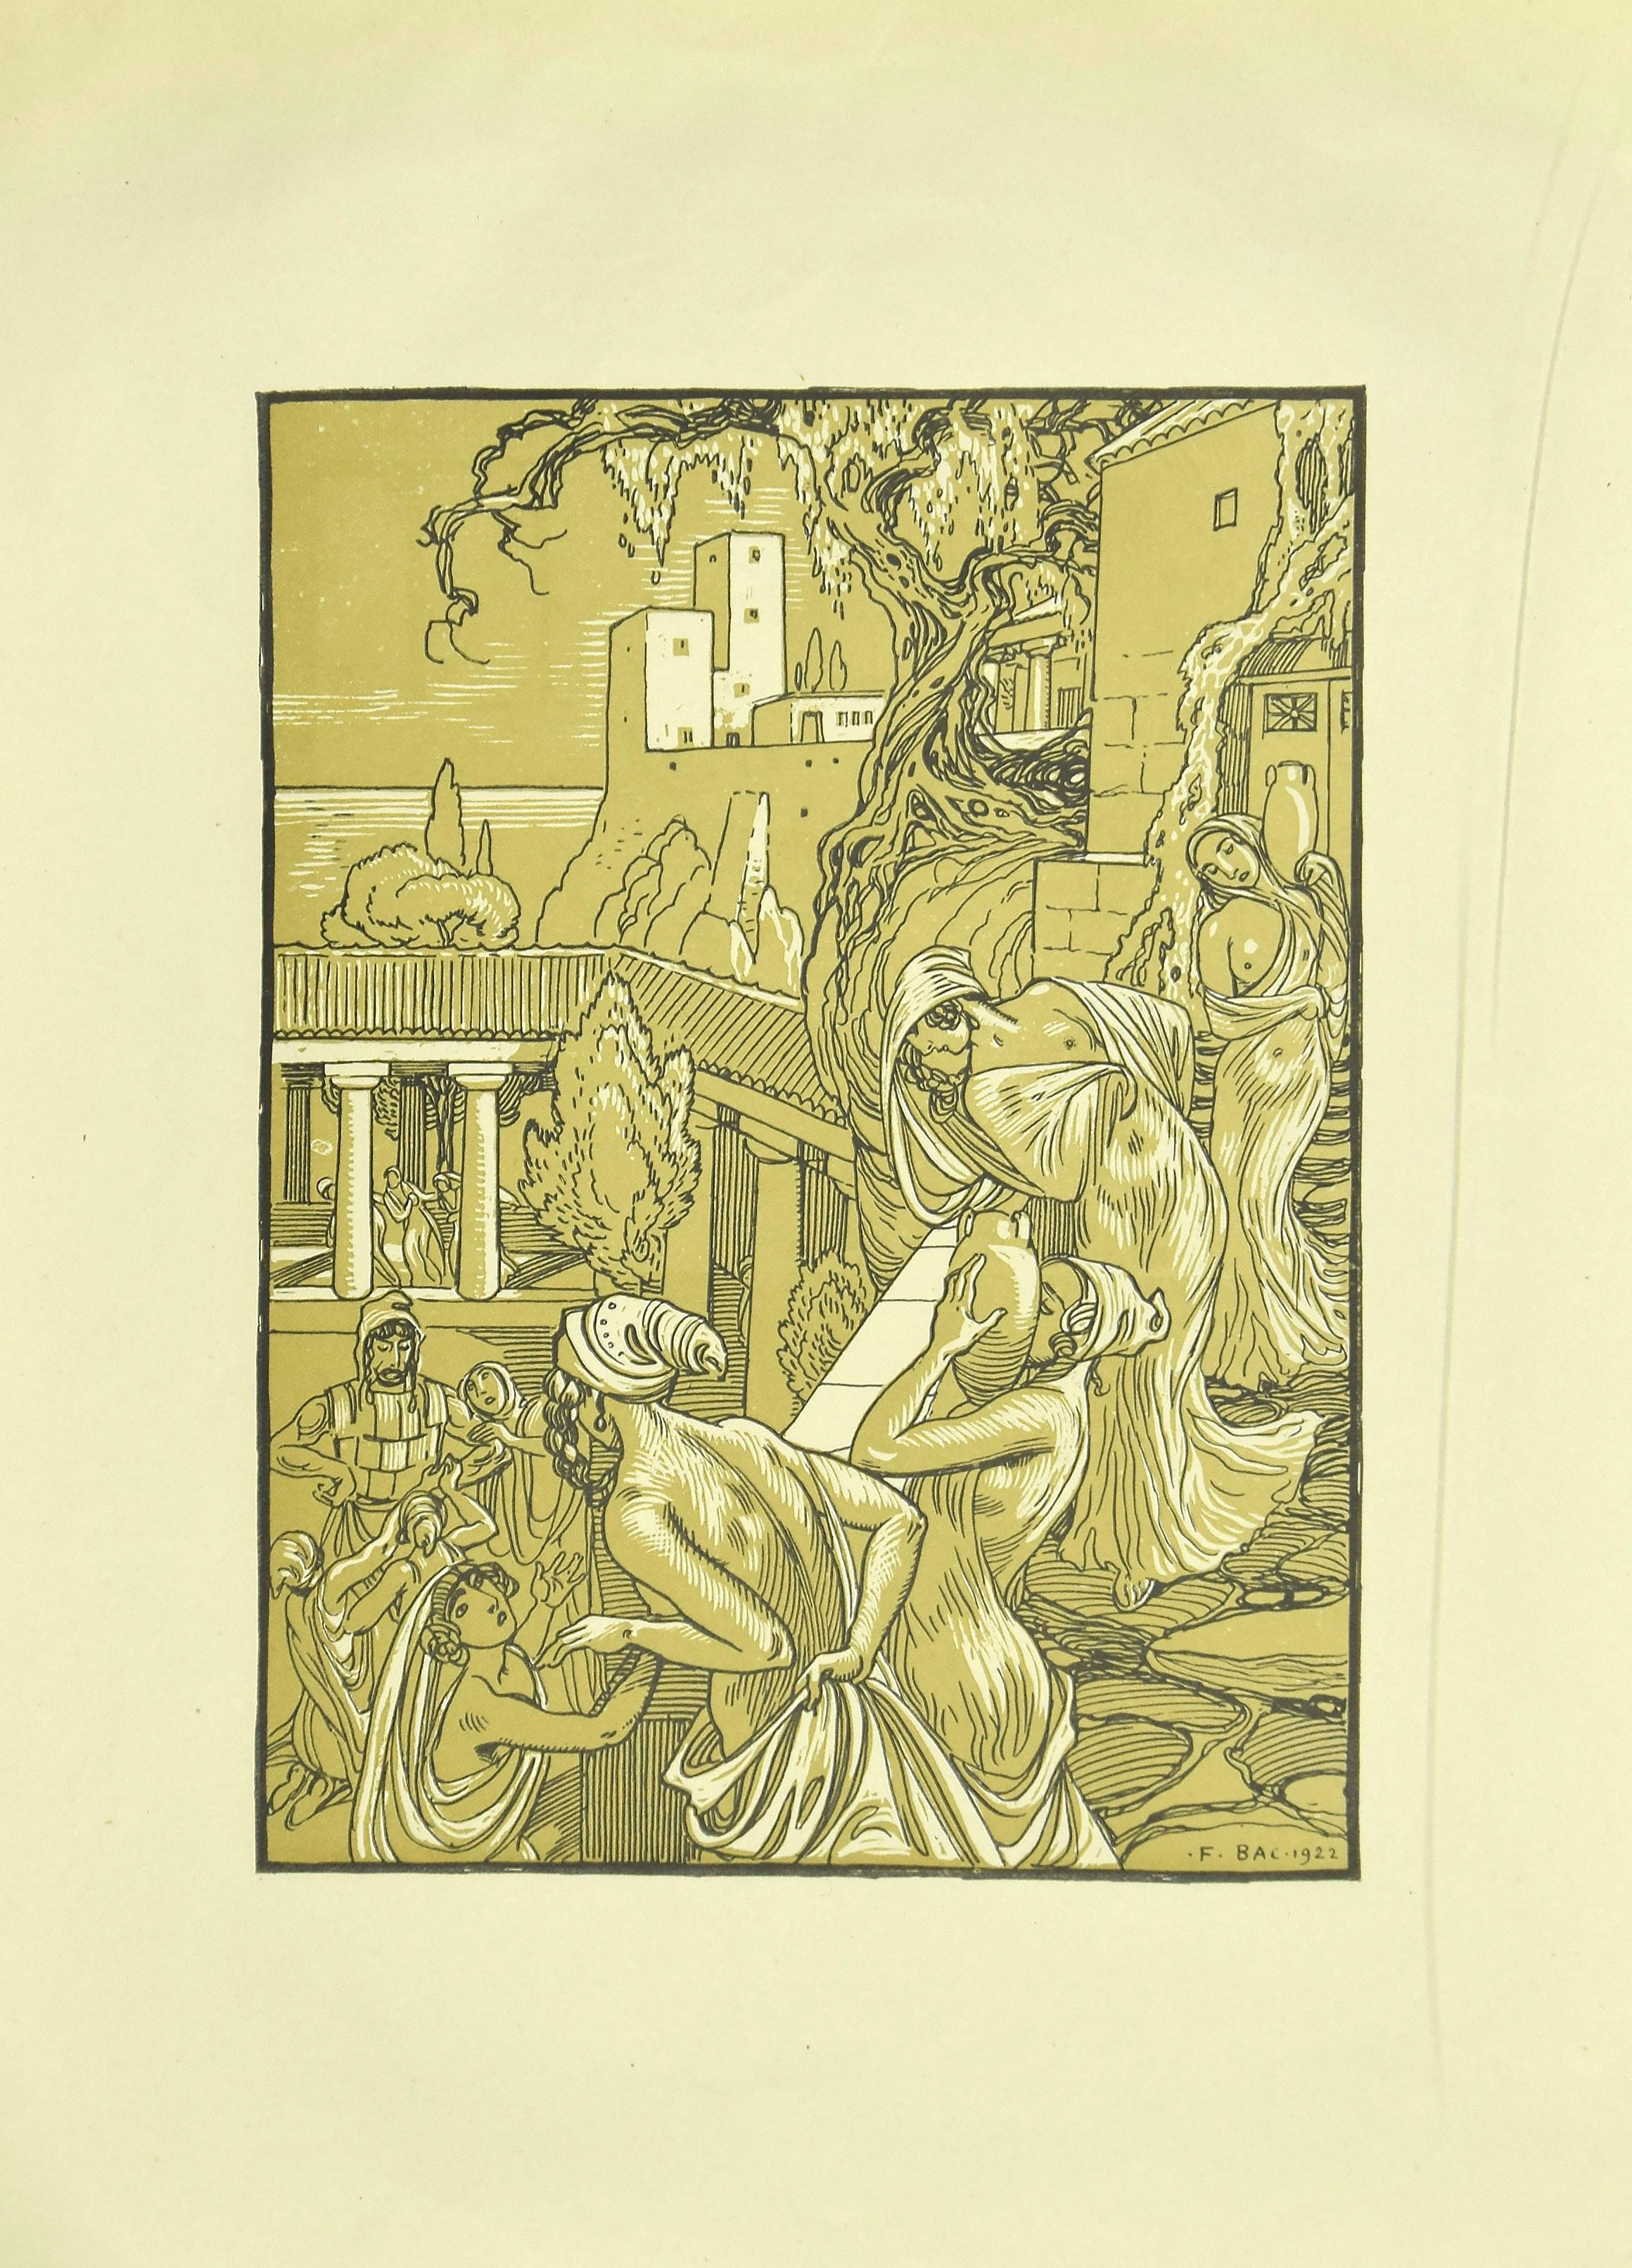 Ferdinand Bac Figurative Print - The Carriers of the Amphorae - Original Lithograph by F. Bac - 1922